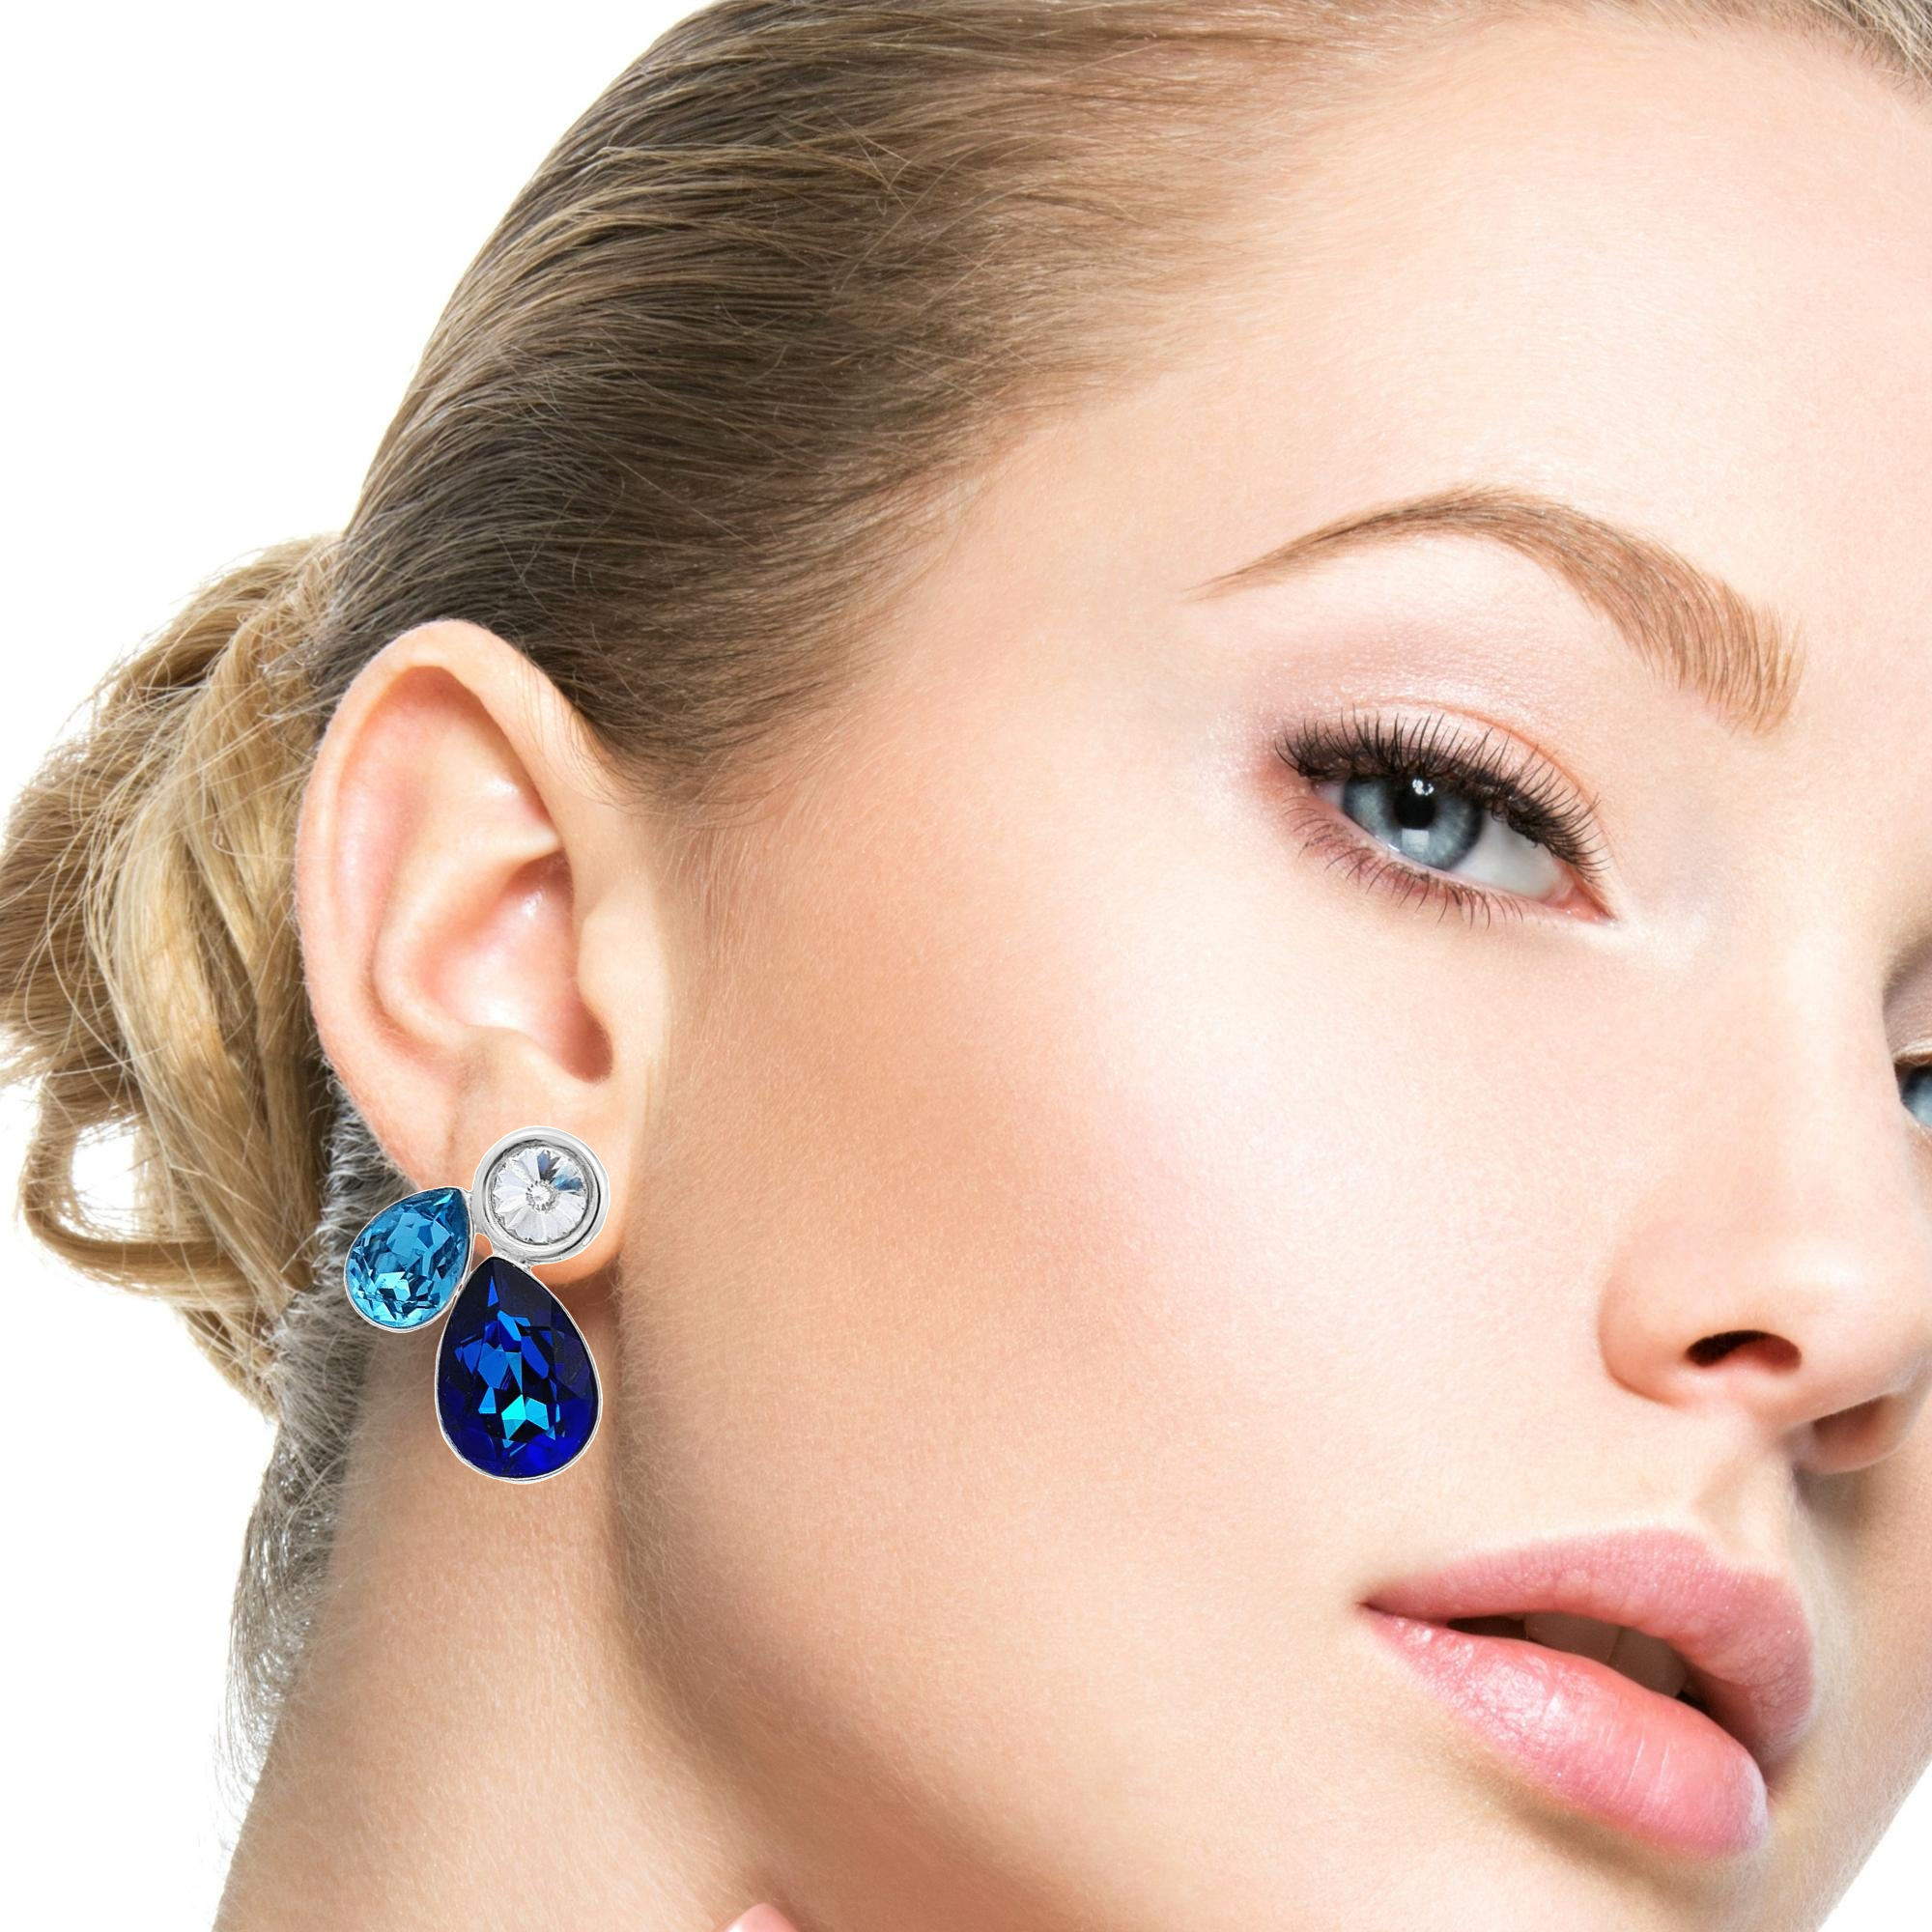 Infinite Sea Silver Cluster Stud Earrings worn by a model, showing their statement-making look.